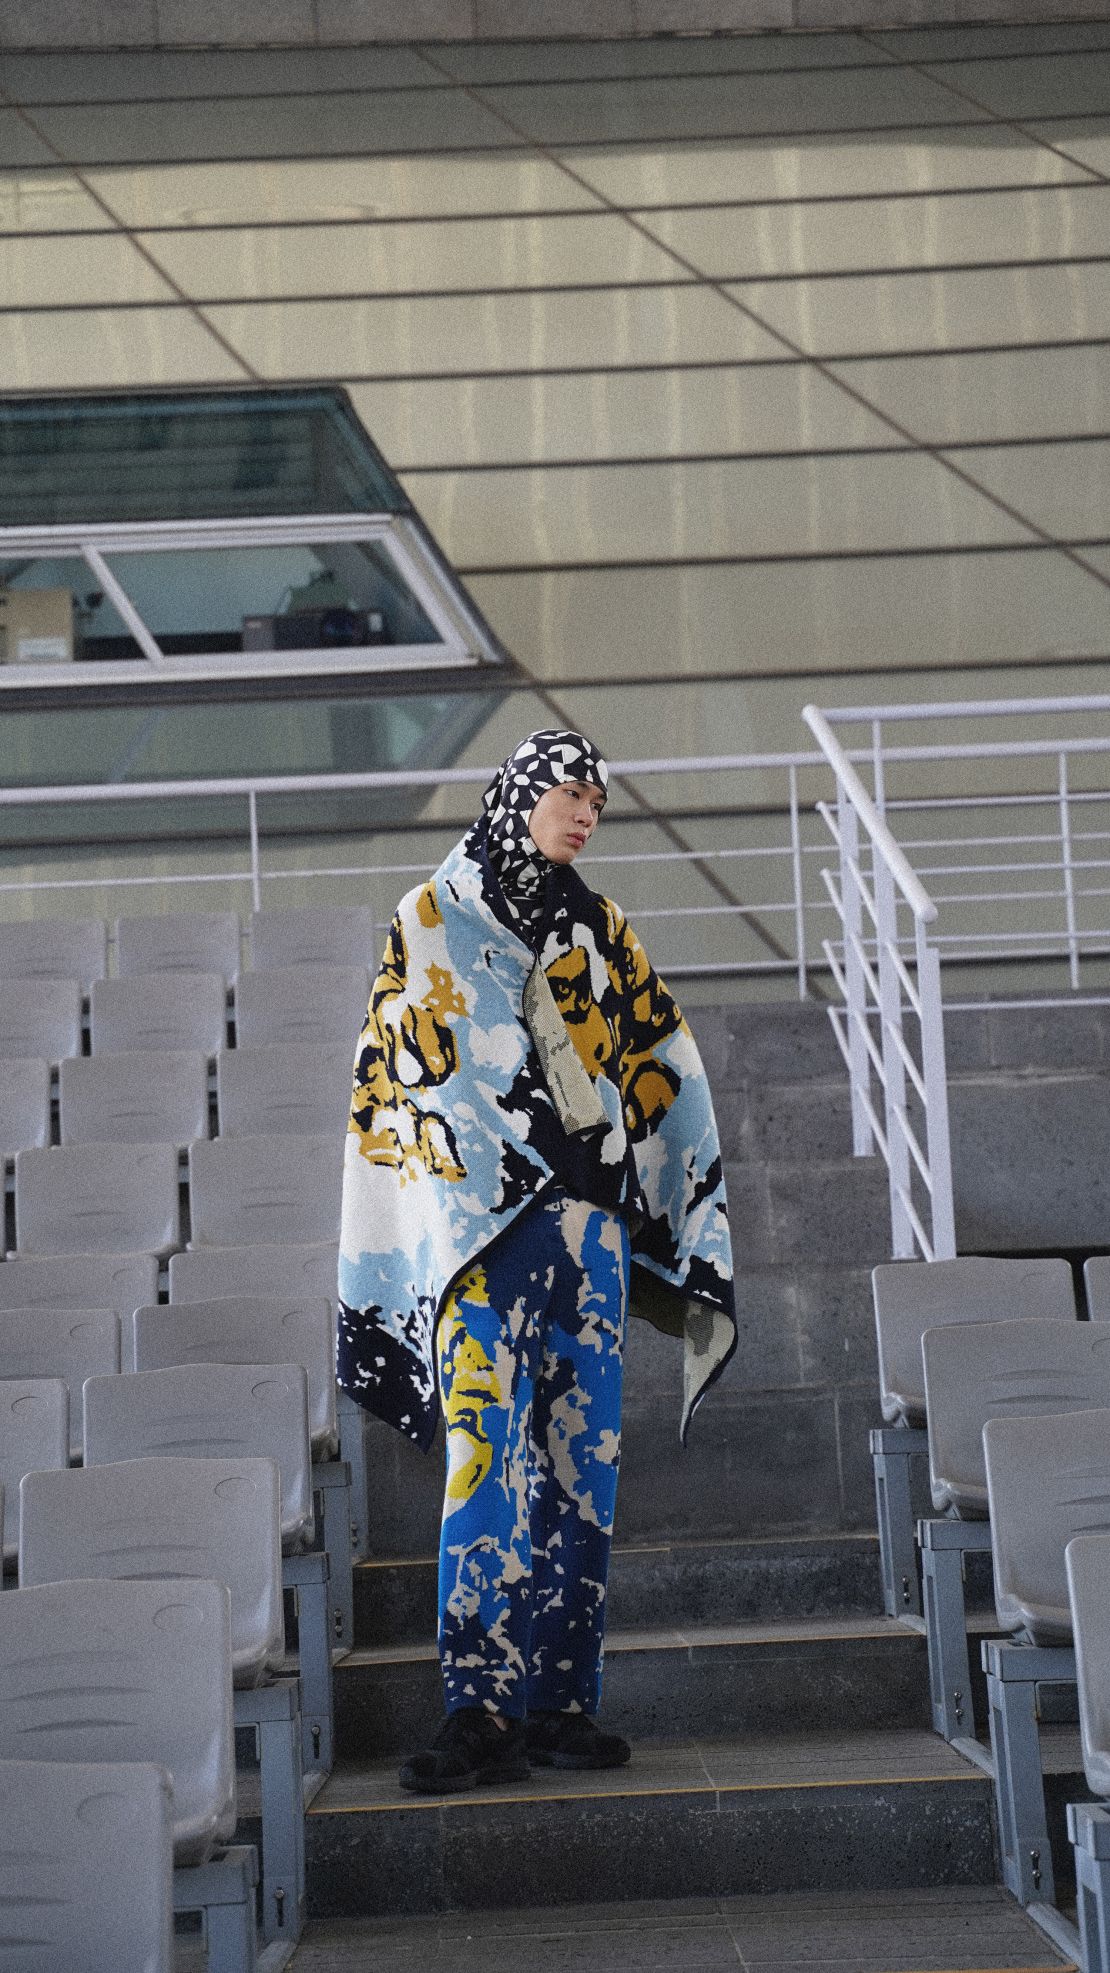 SEOKWOON YOON 
opened with a model wearing this look, with patterns informed by the juxtaposition of industrial materials and flowers. 